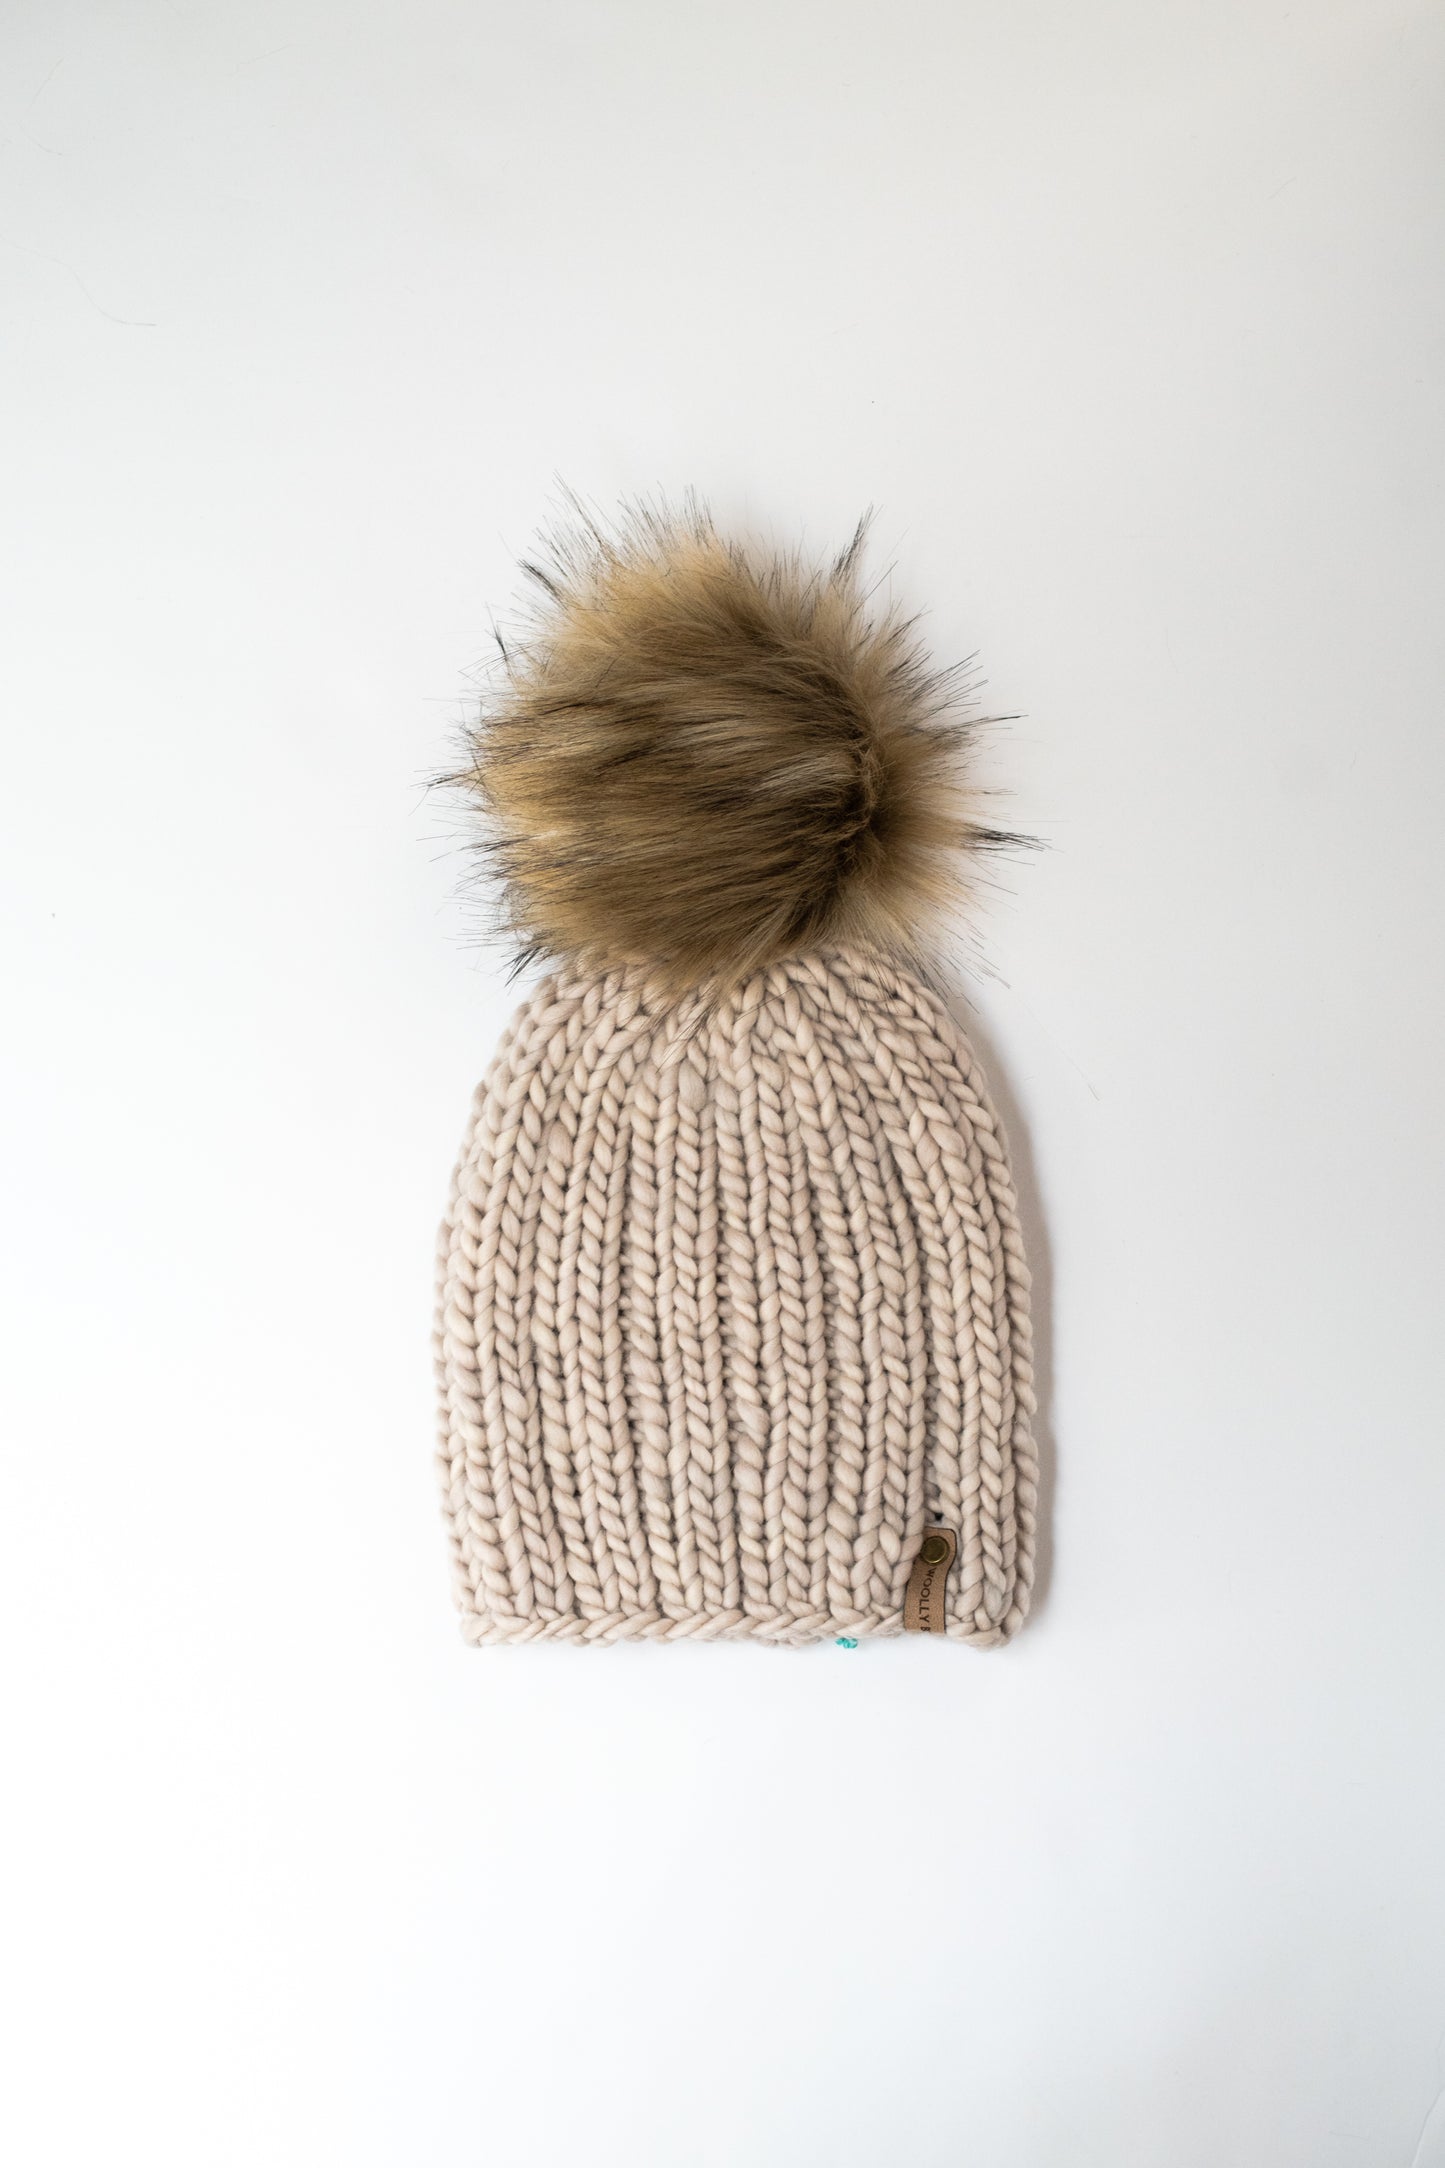 WHOLESALE: Merino or Peruvian Wool Knit Hat with Faux Fur Pom Pom